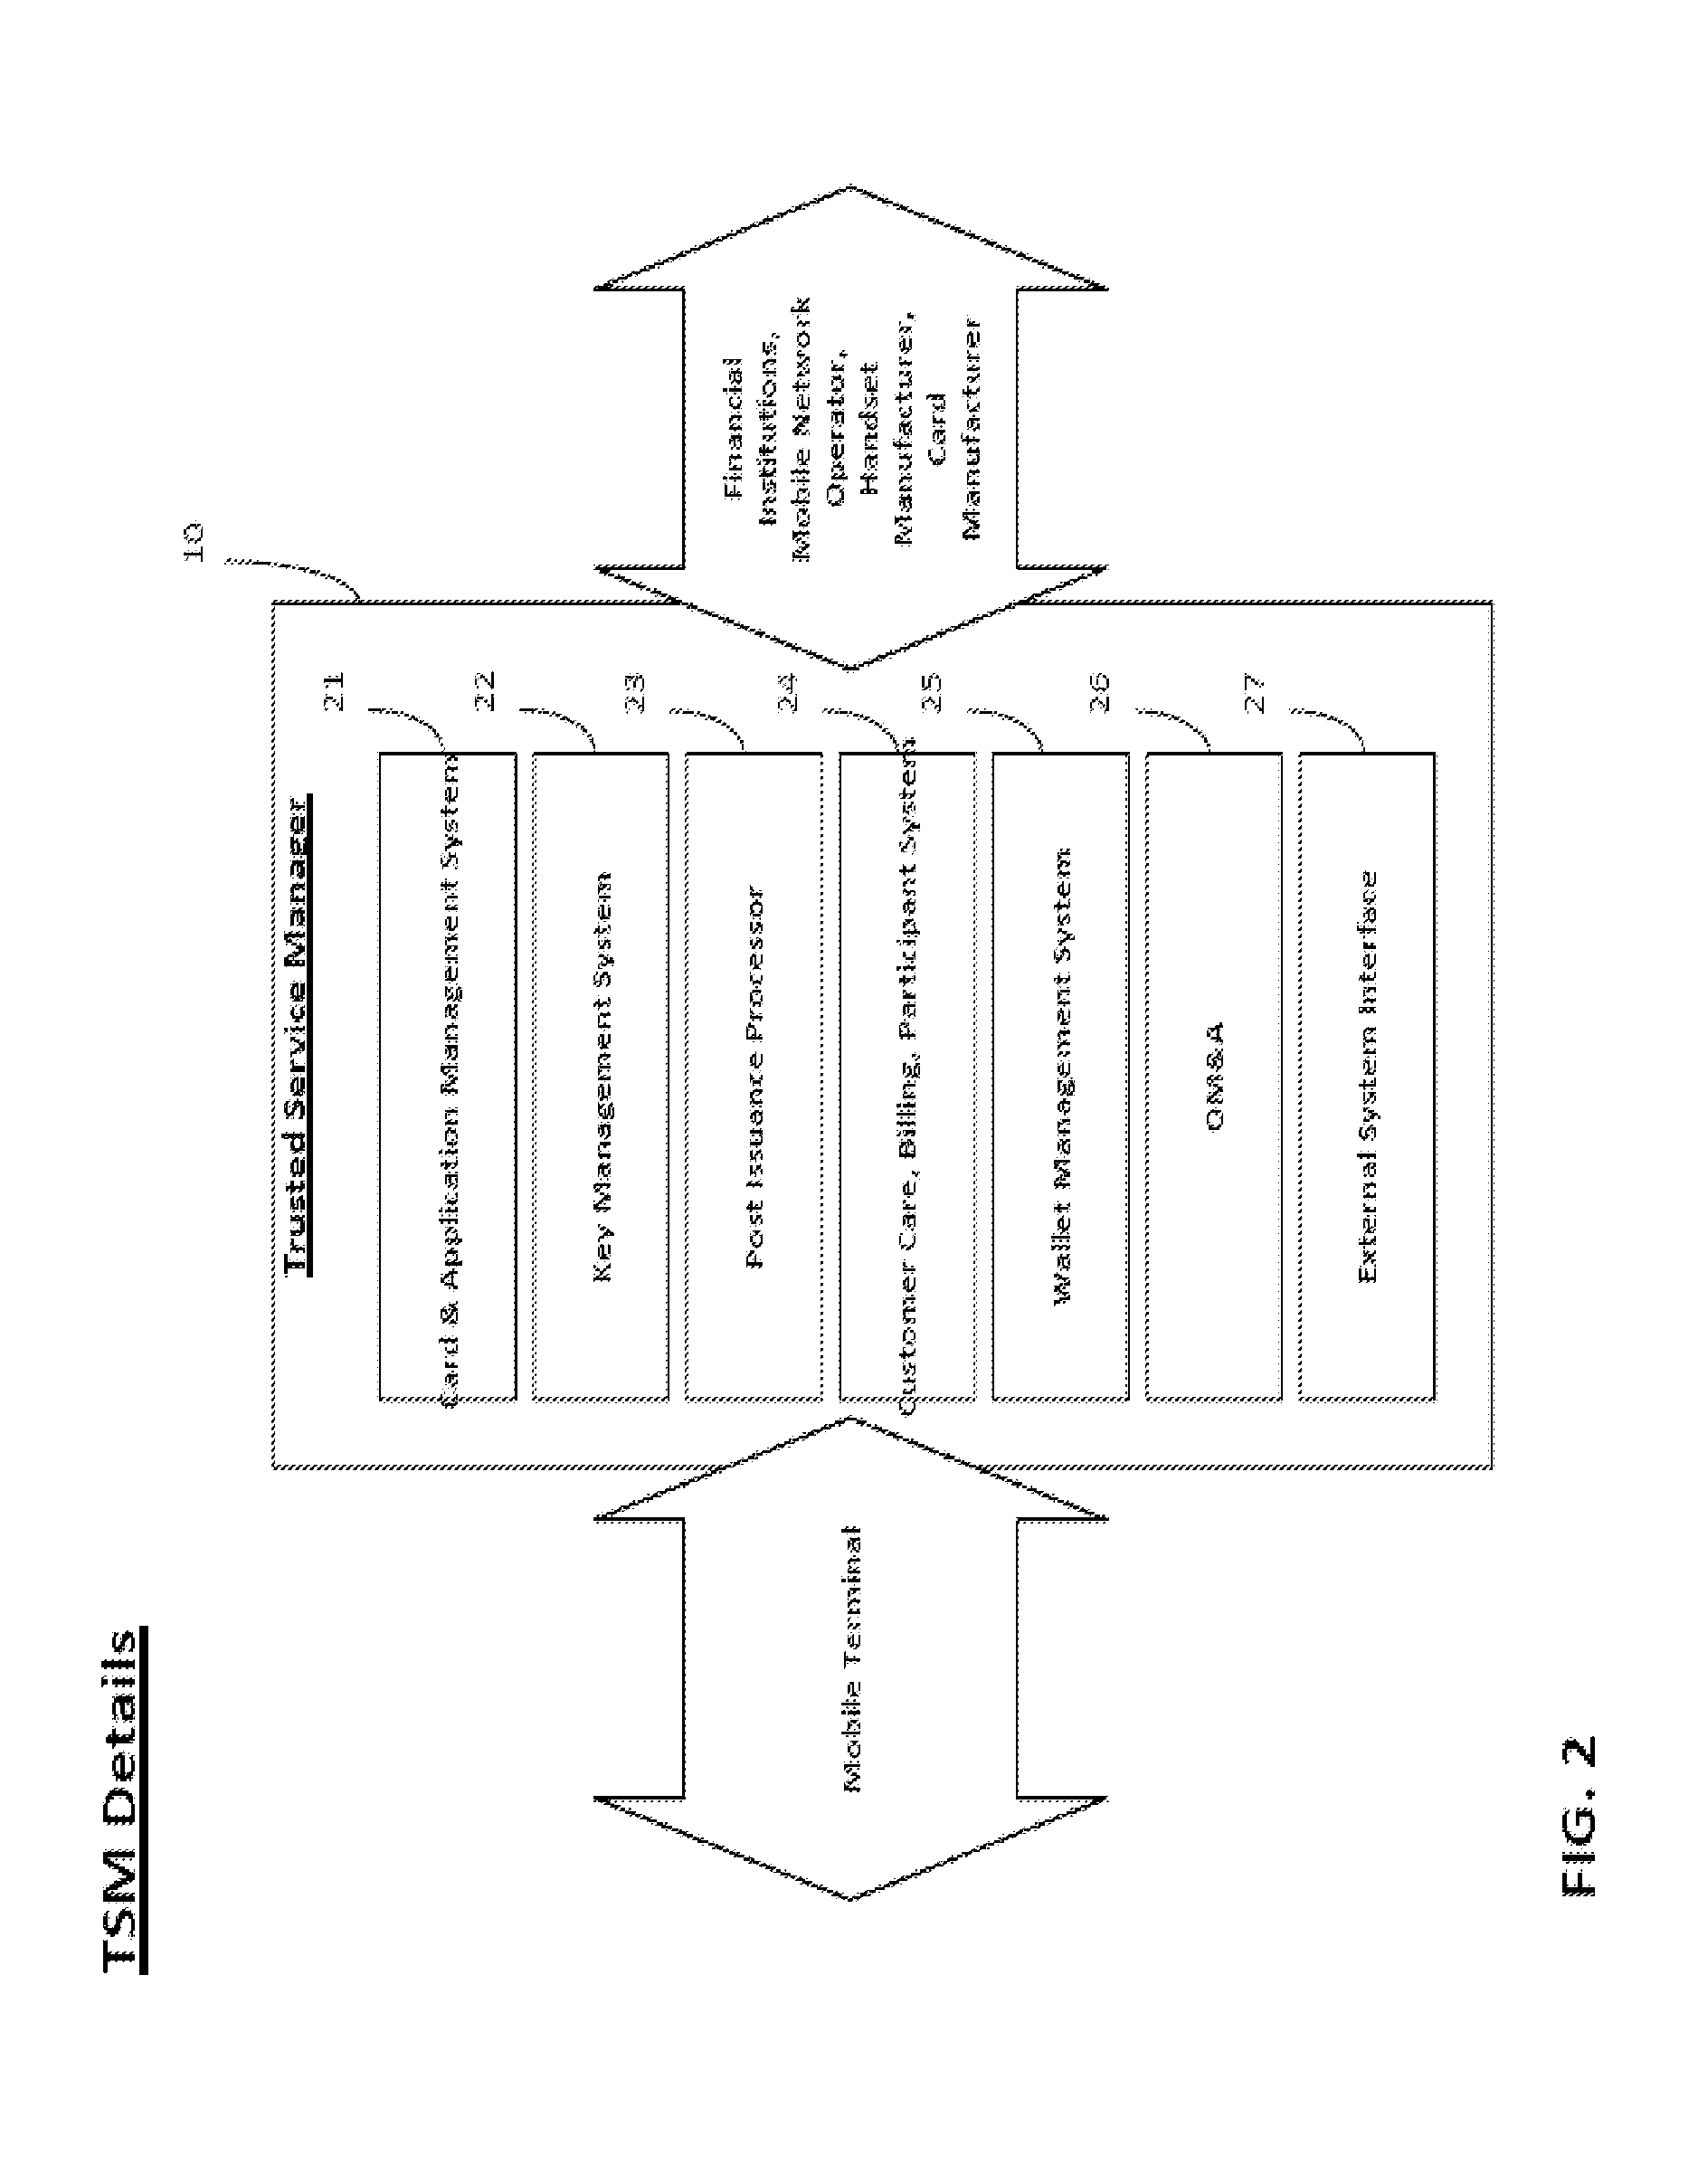 System and method for managing ota provisioning applications through use of profiles and data preparation